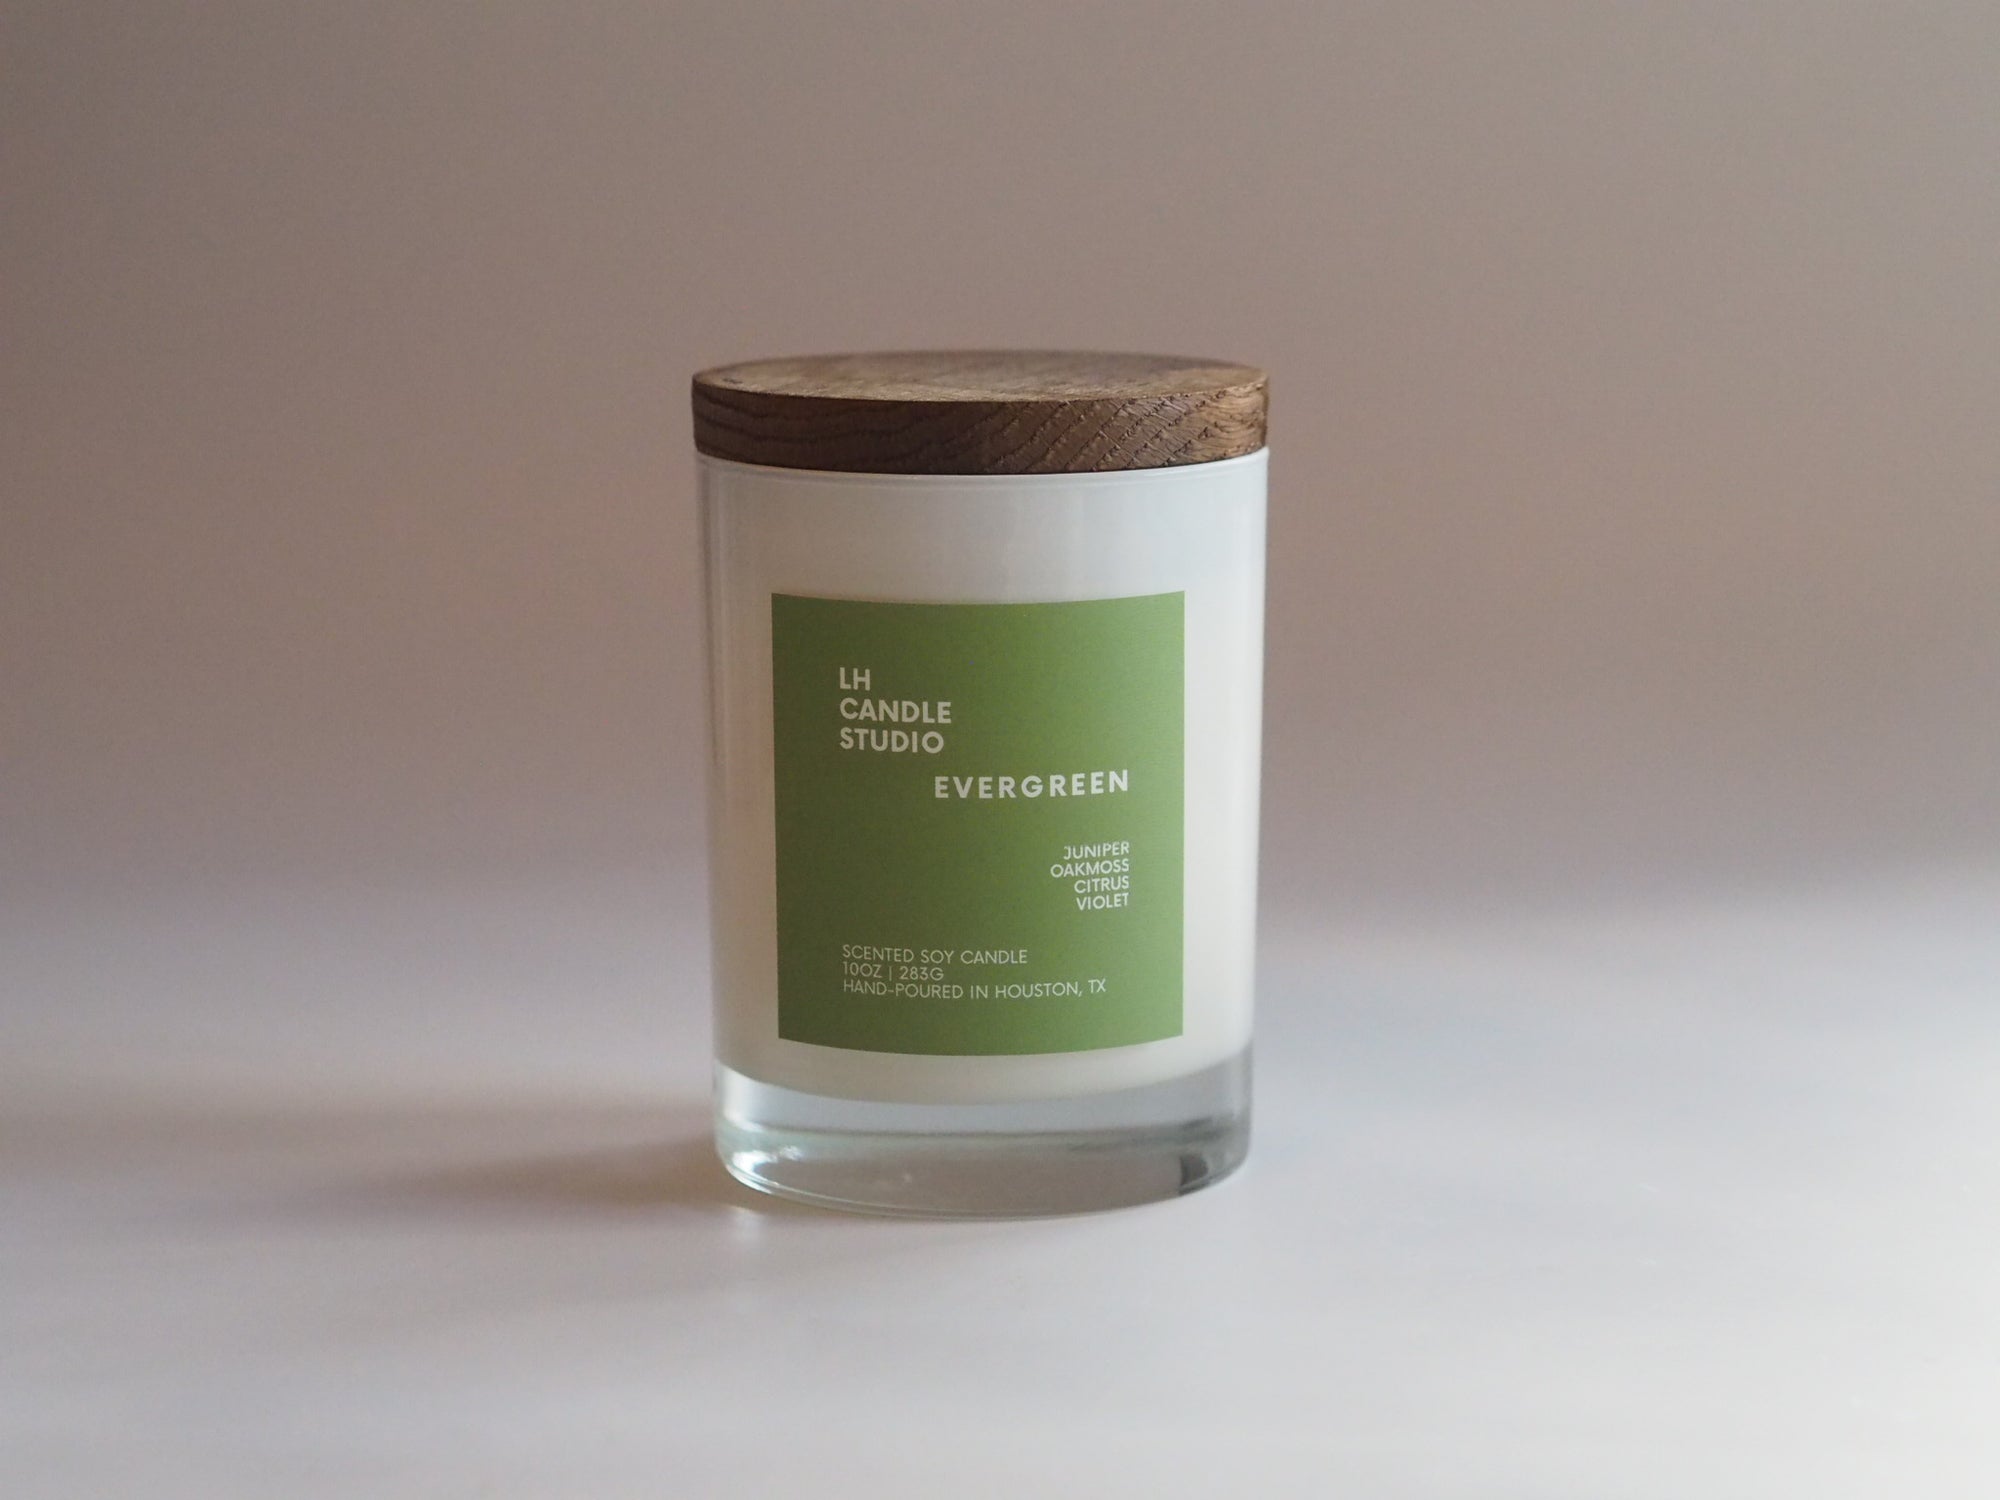 Evergreen Candle - LH CANDLE STUDIO